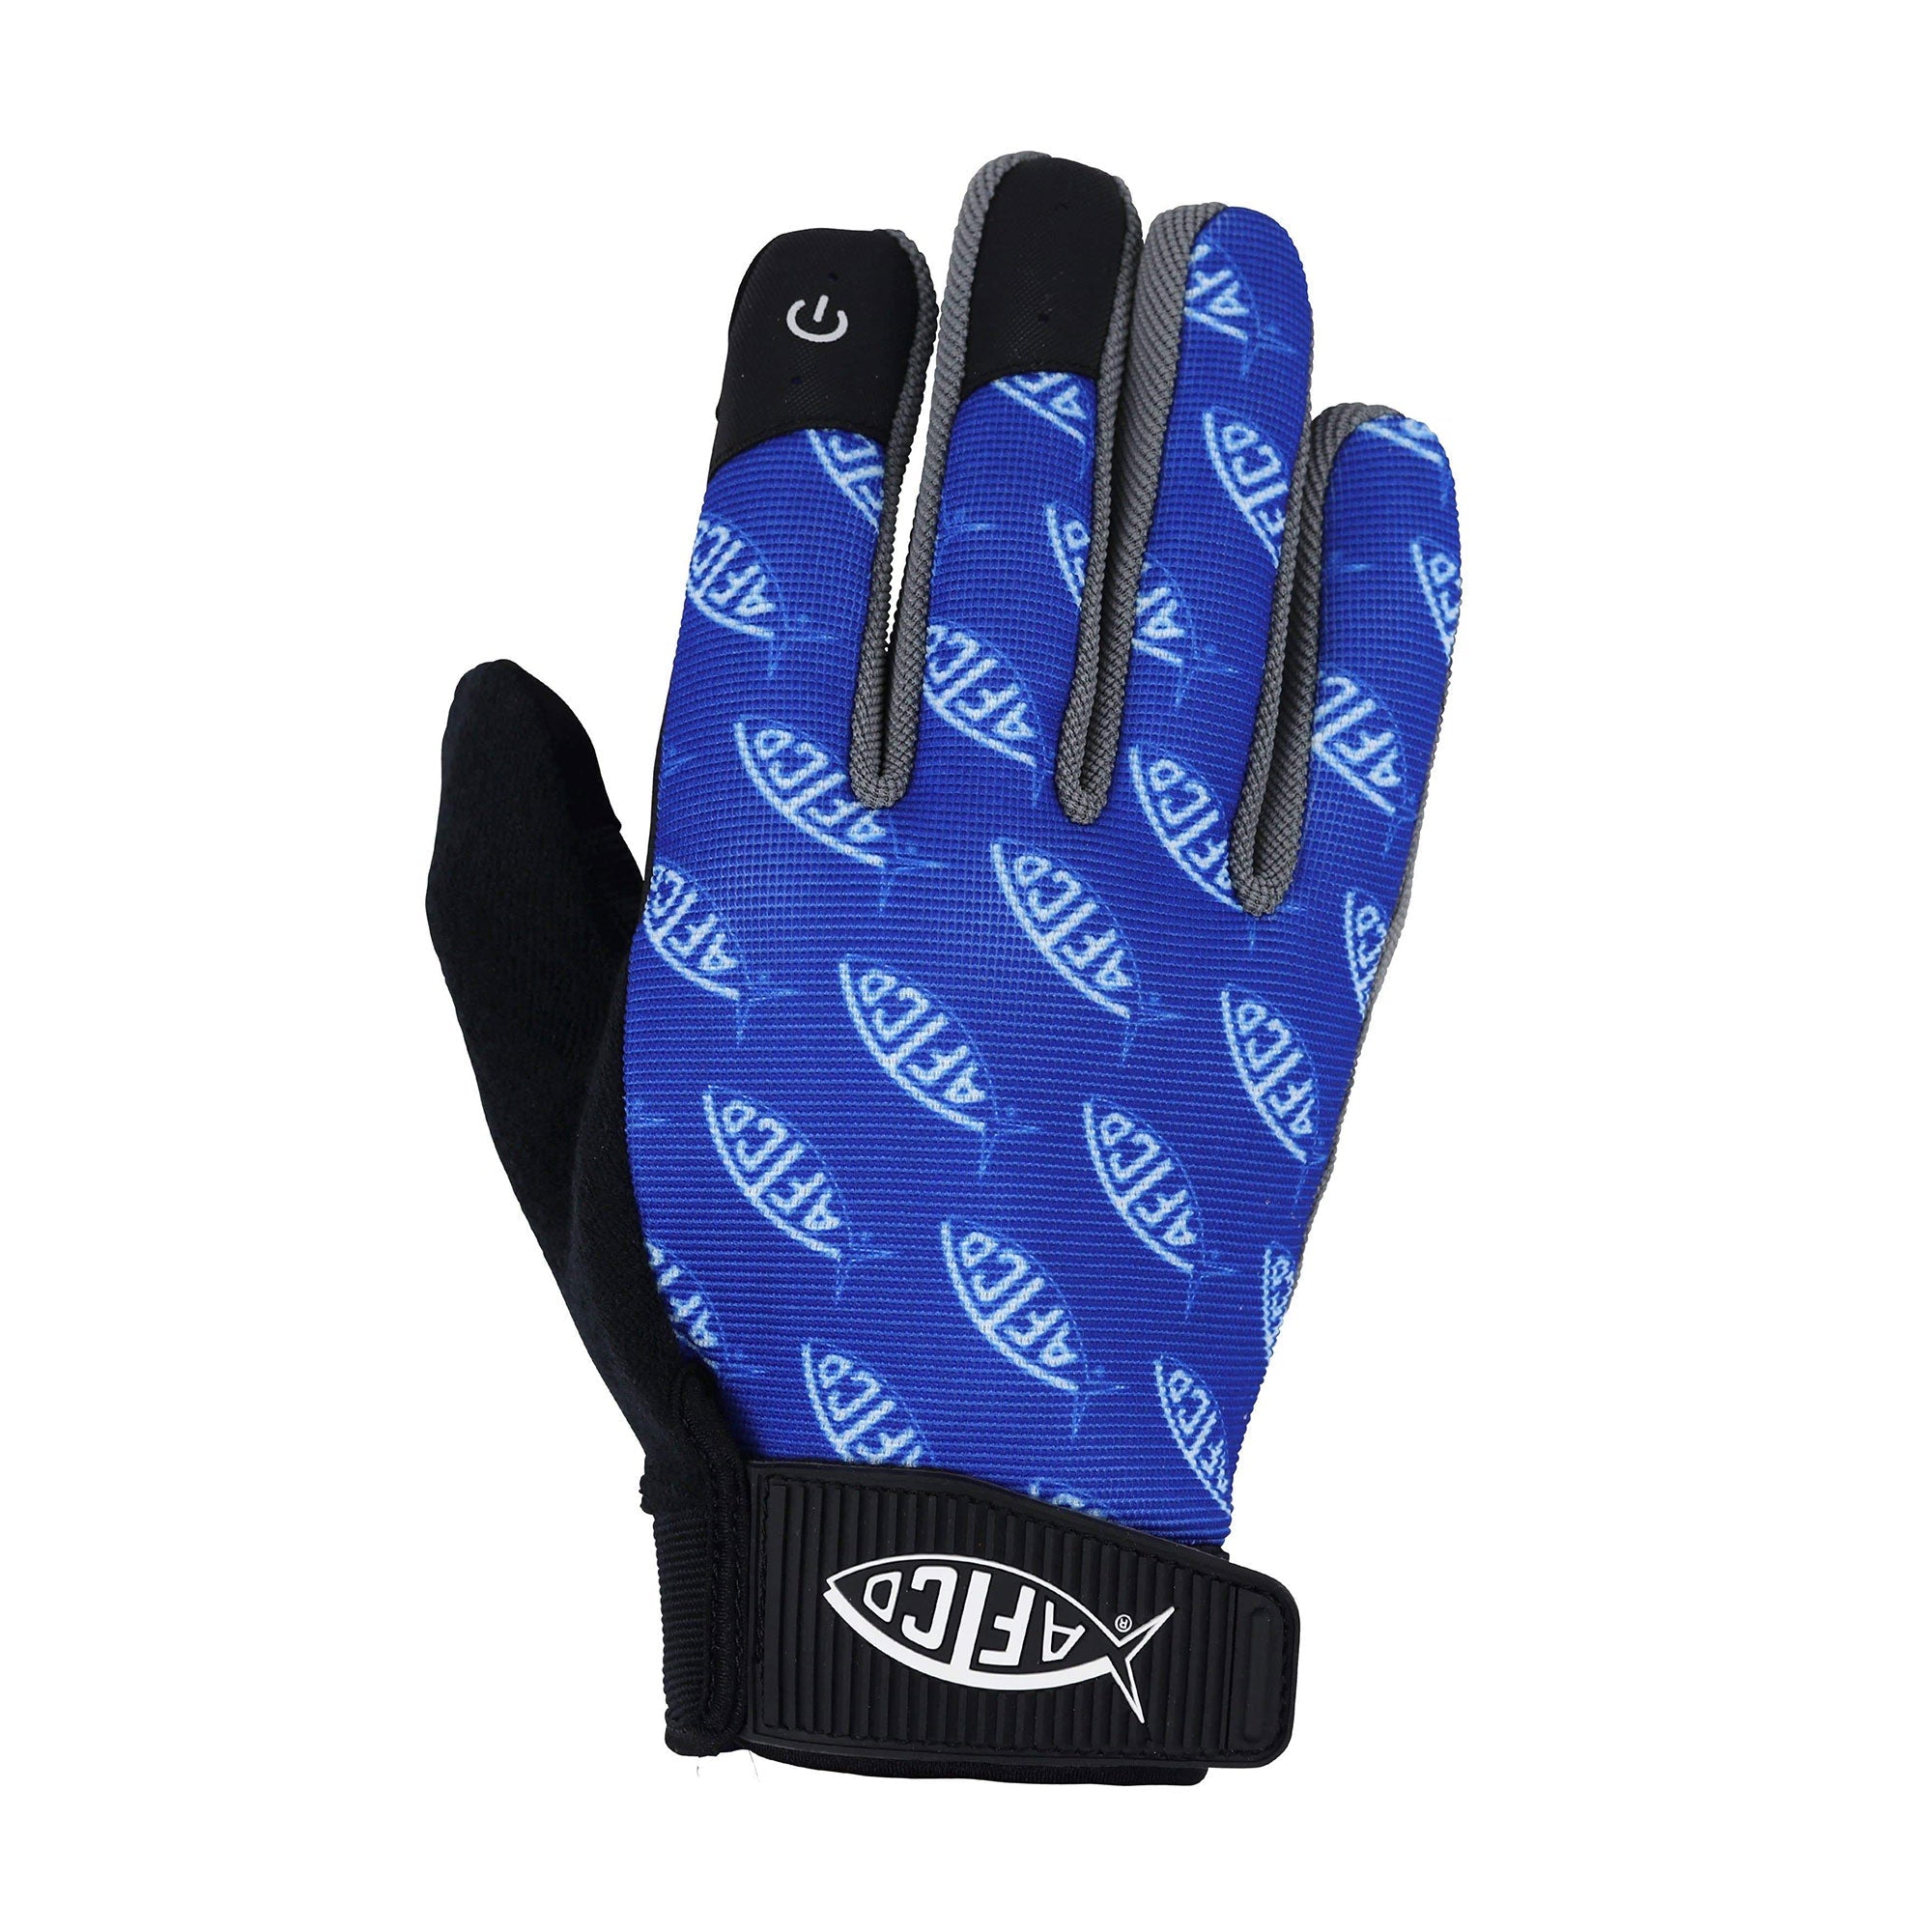 AFTCO Utility Fishing Gloves - Scatter - Large